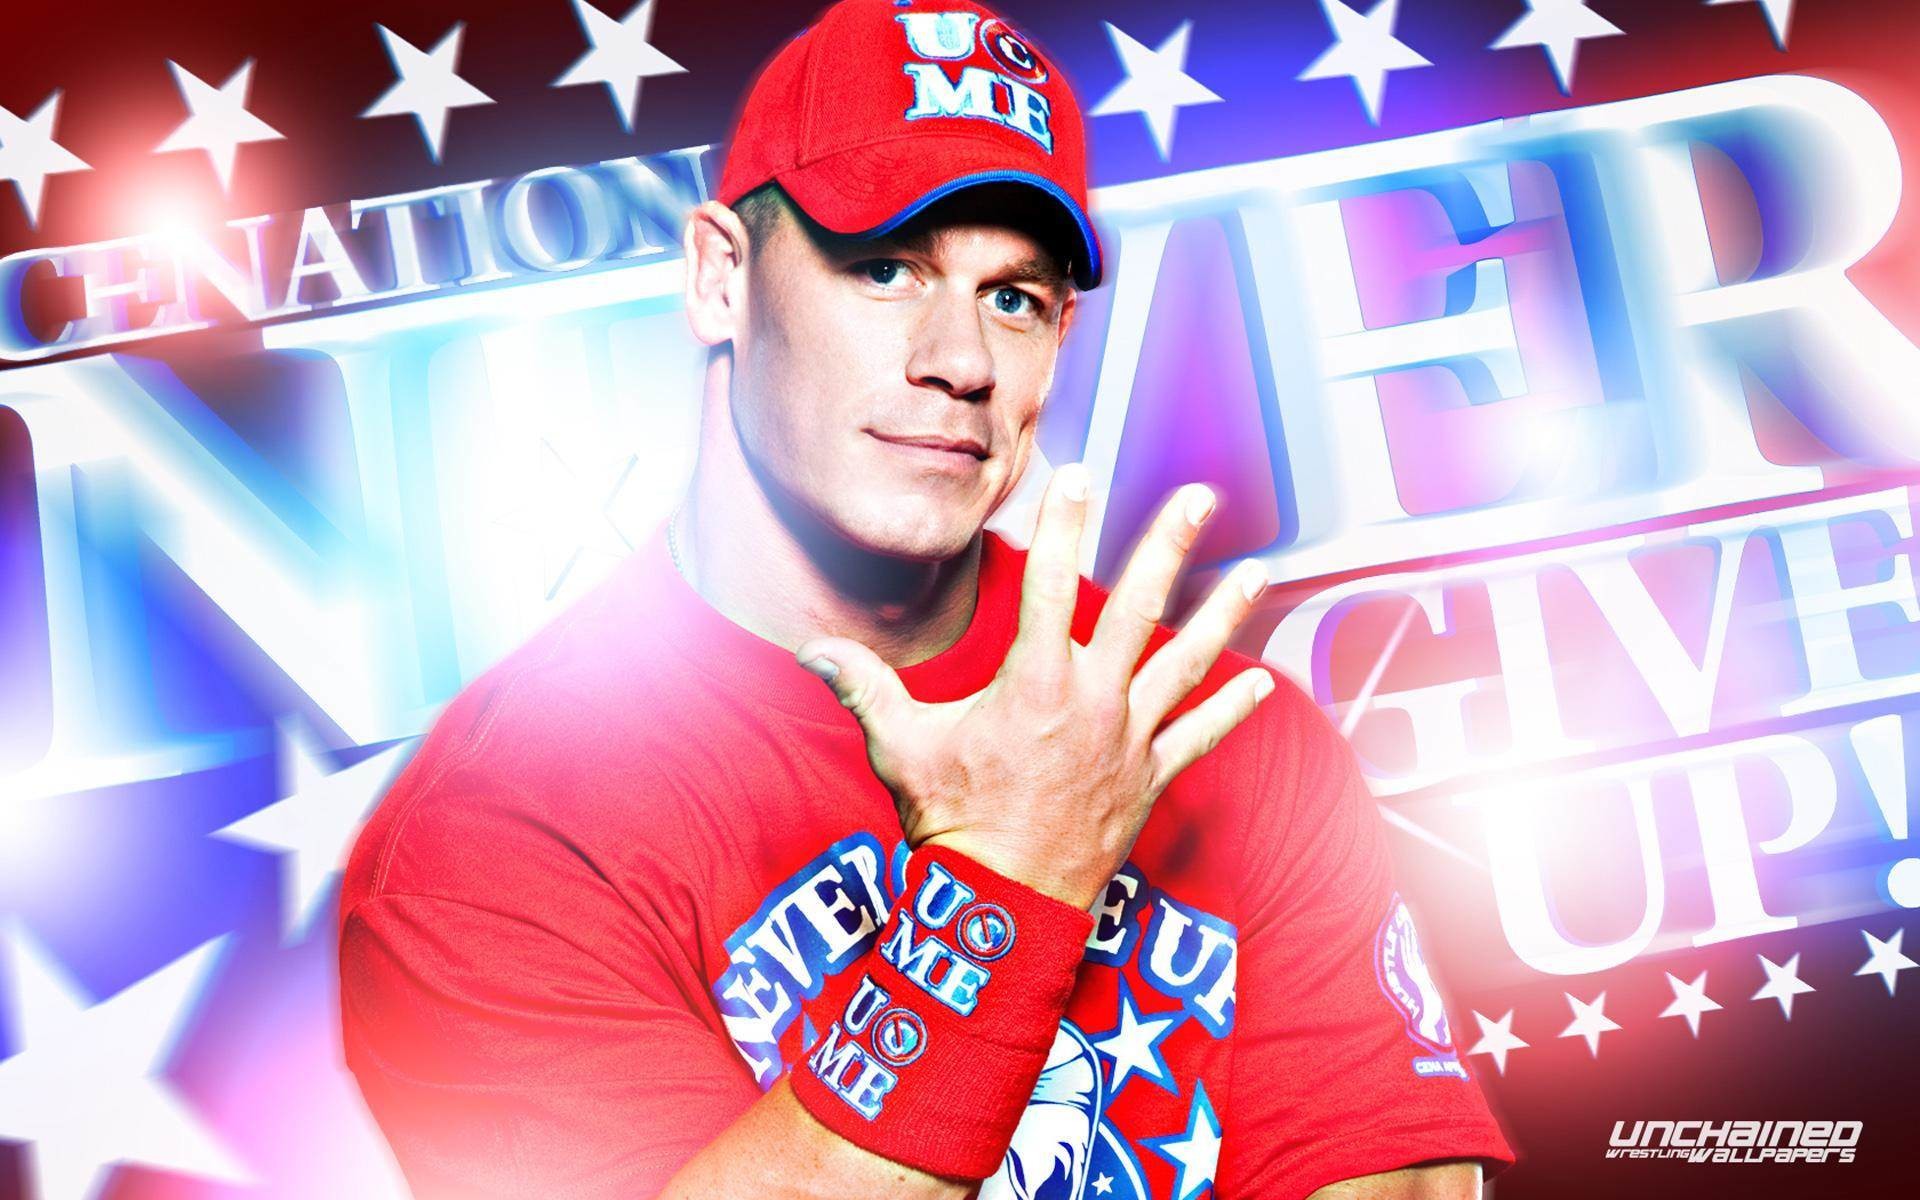 WWE John Cena Wallpapers HD Images, HD Pictures 19201200 John Cena Wallpapers